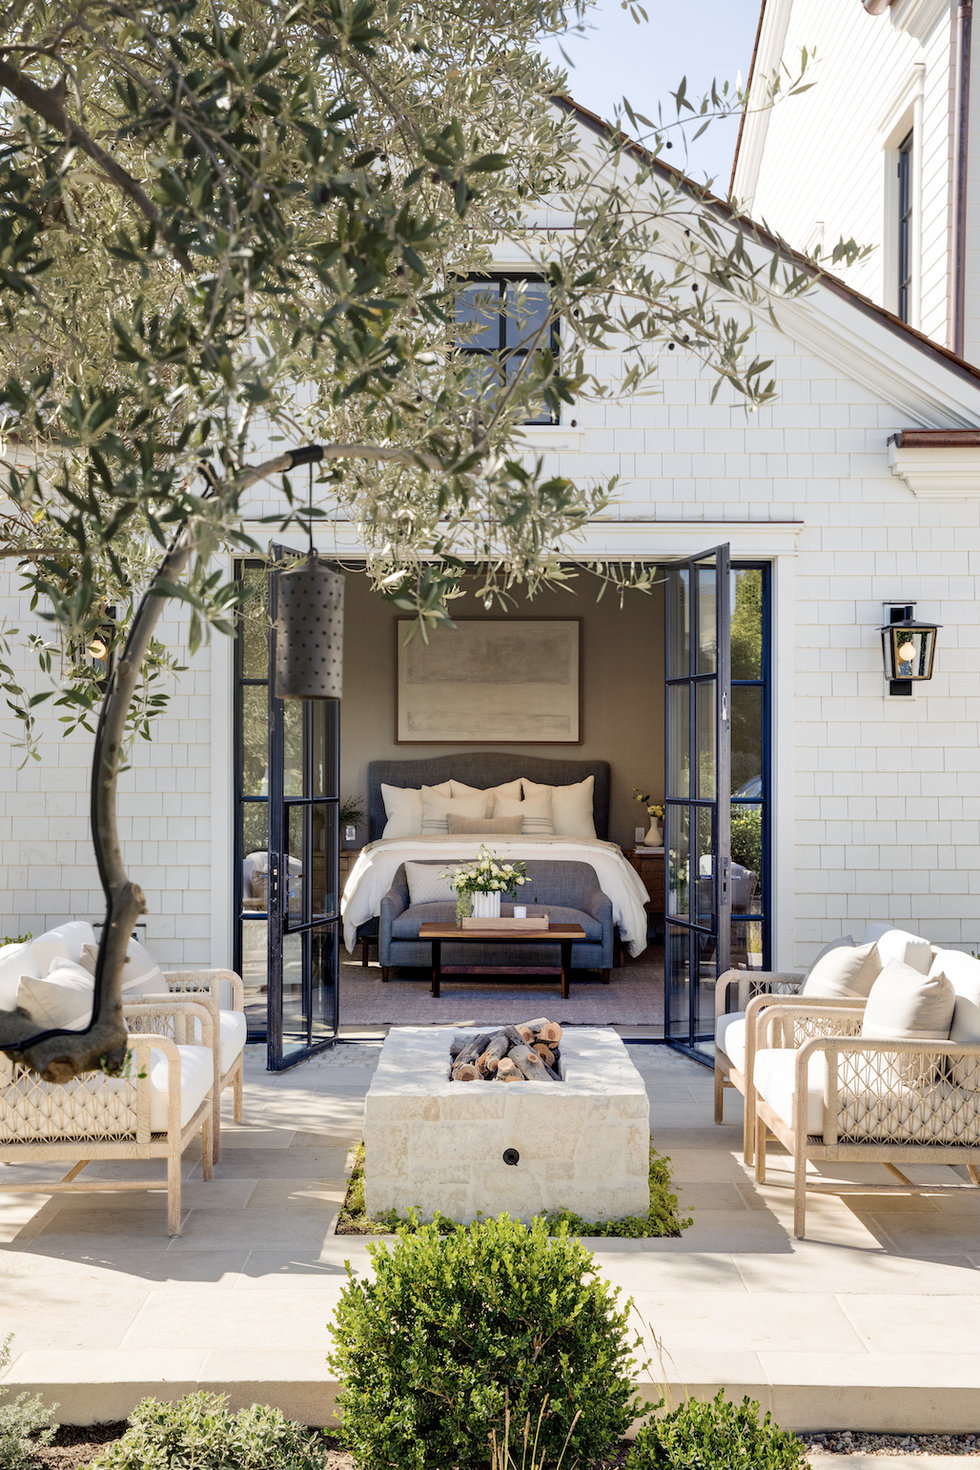 75 Best Outdoor Room Ideas for Balconies and Backyards Alike